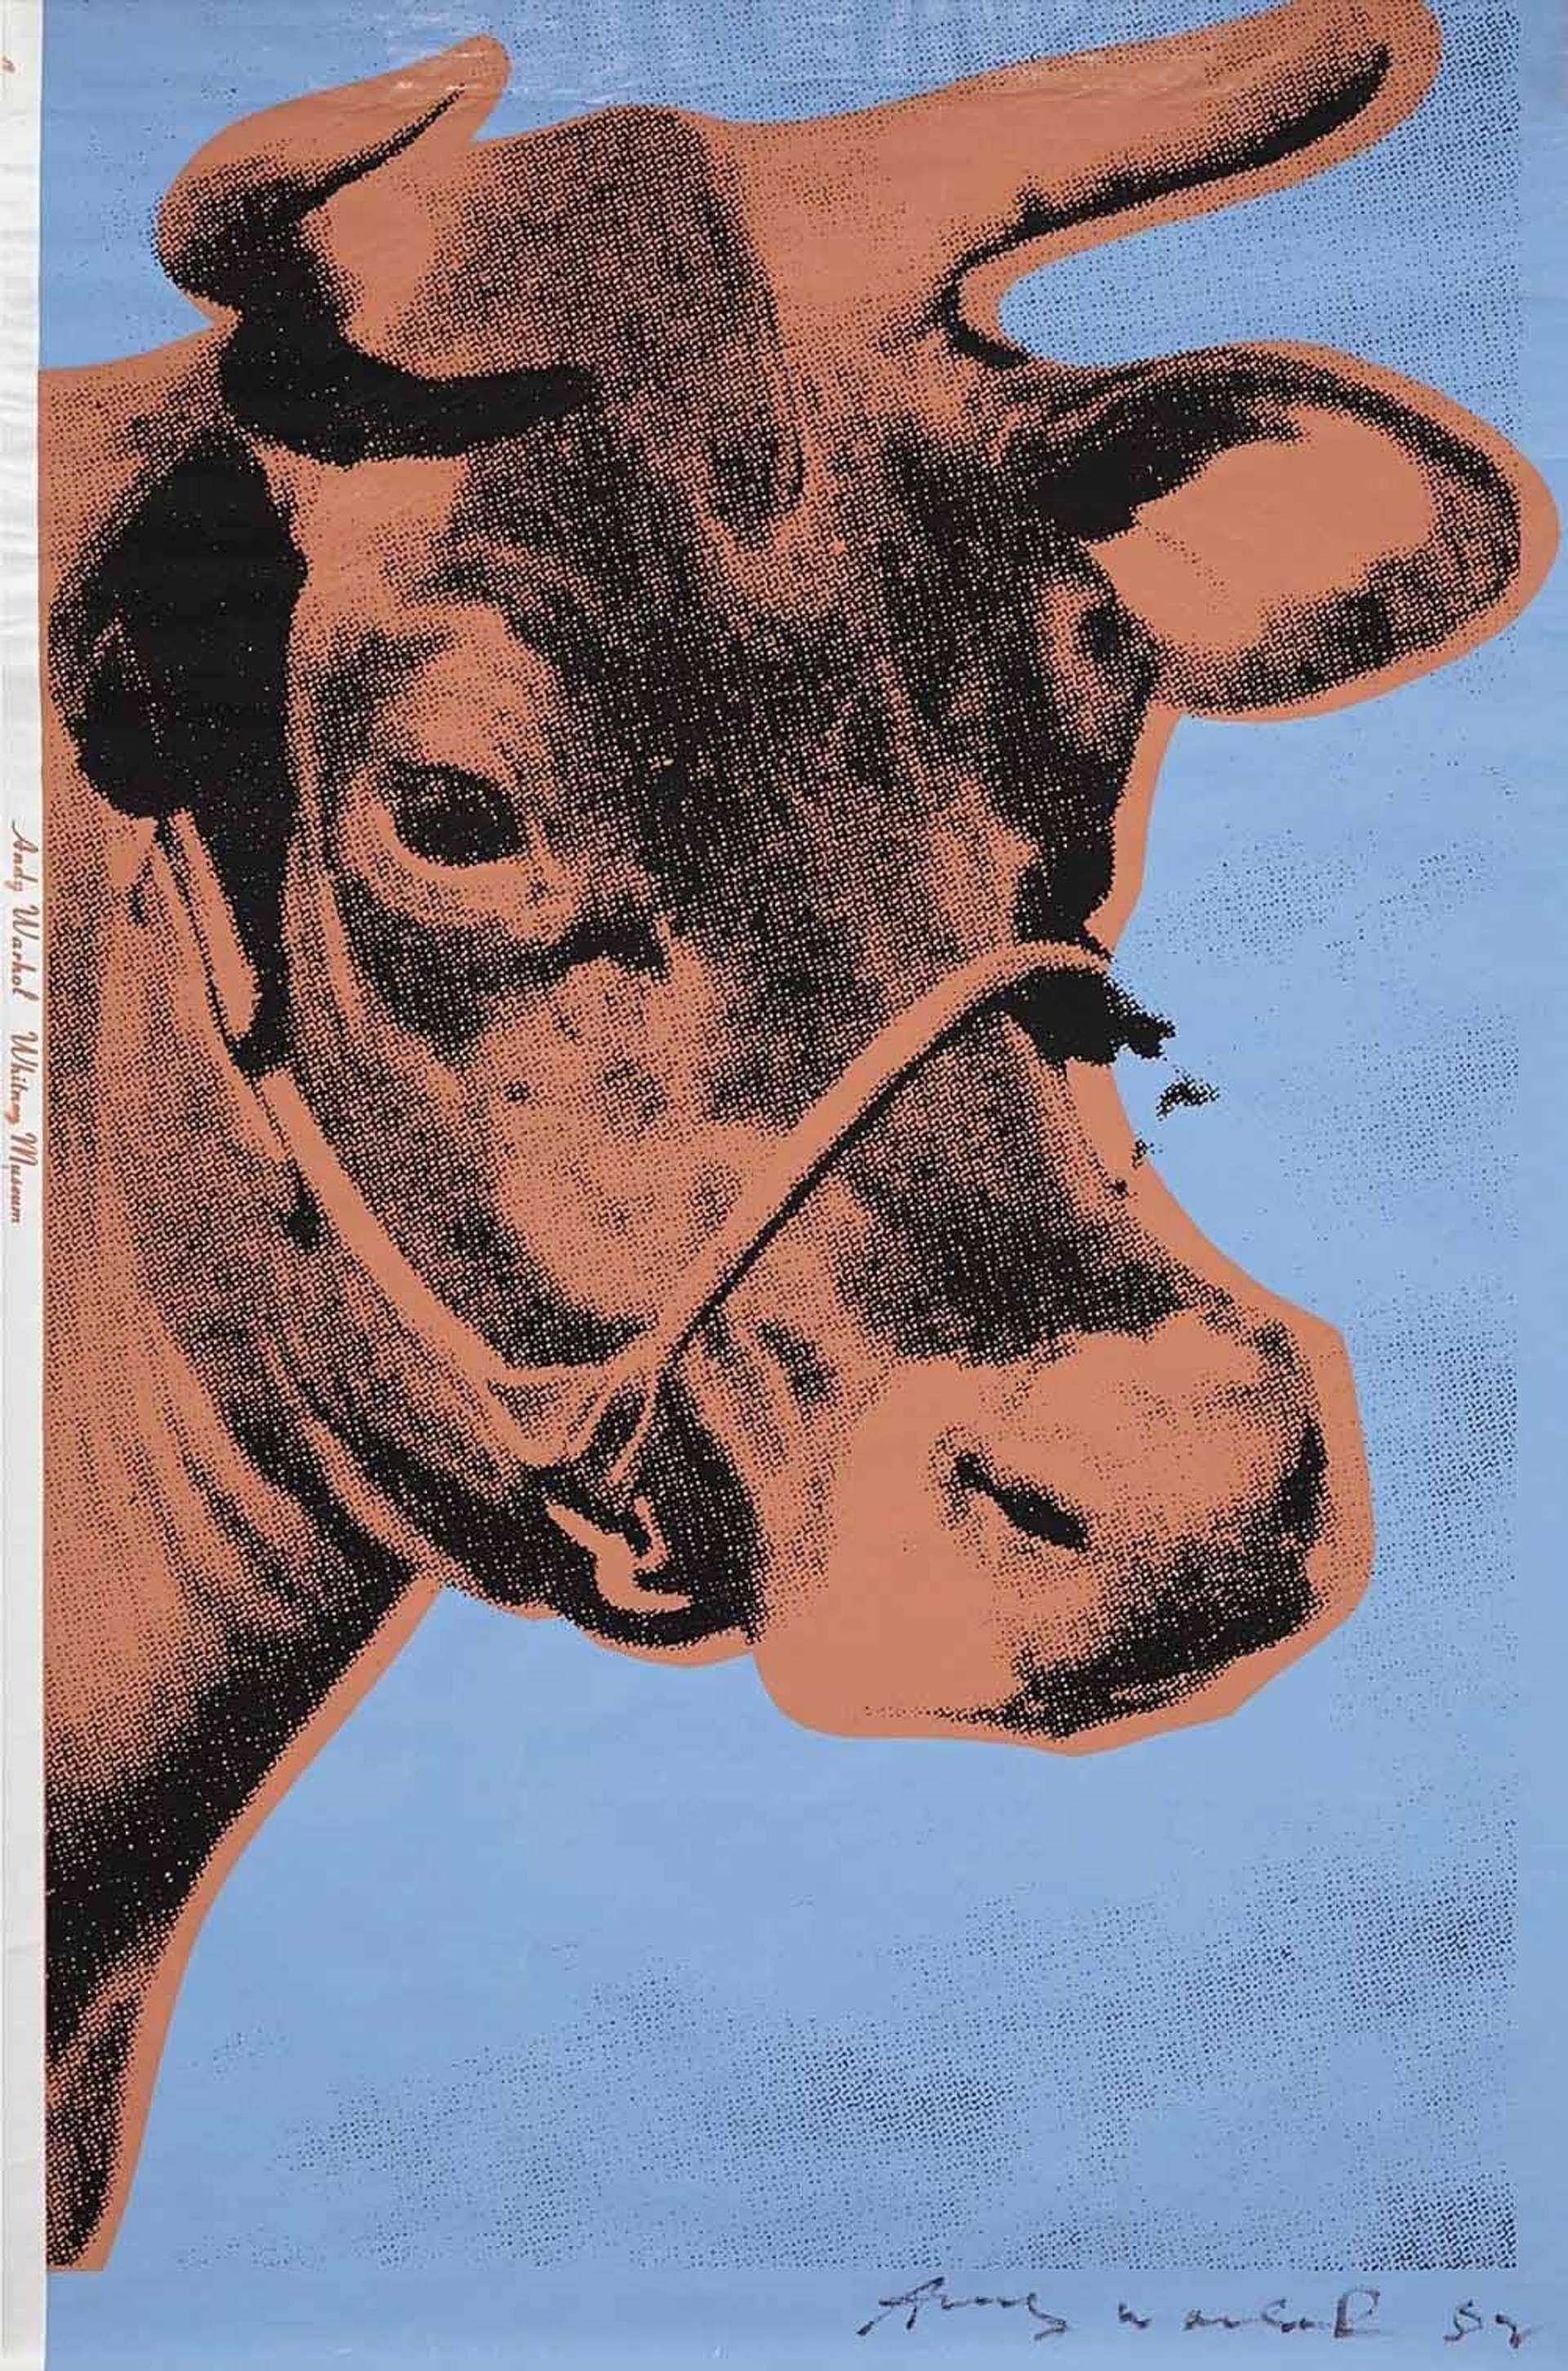 Cow (F. & S. II.11A) by Andy Warhol